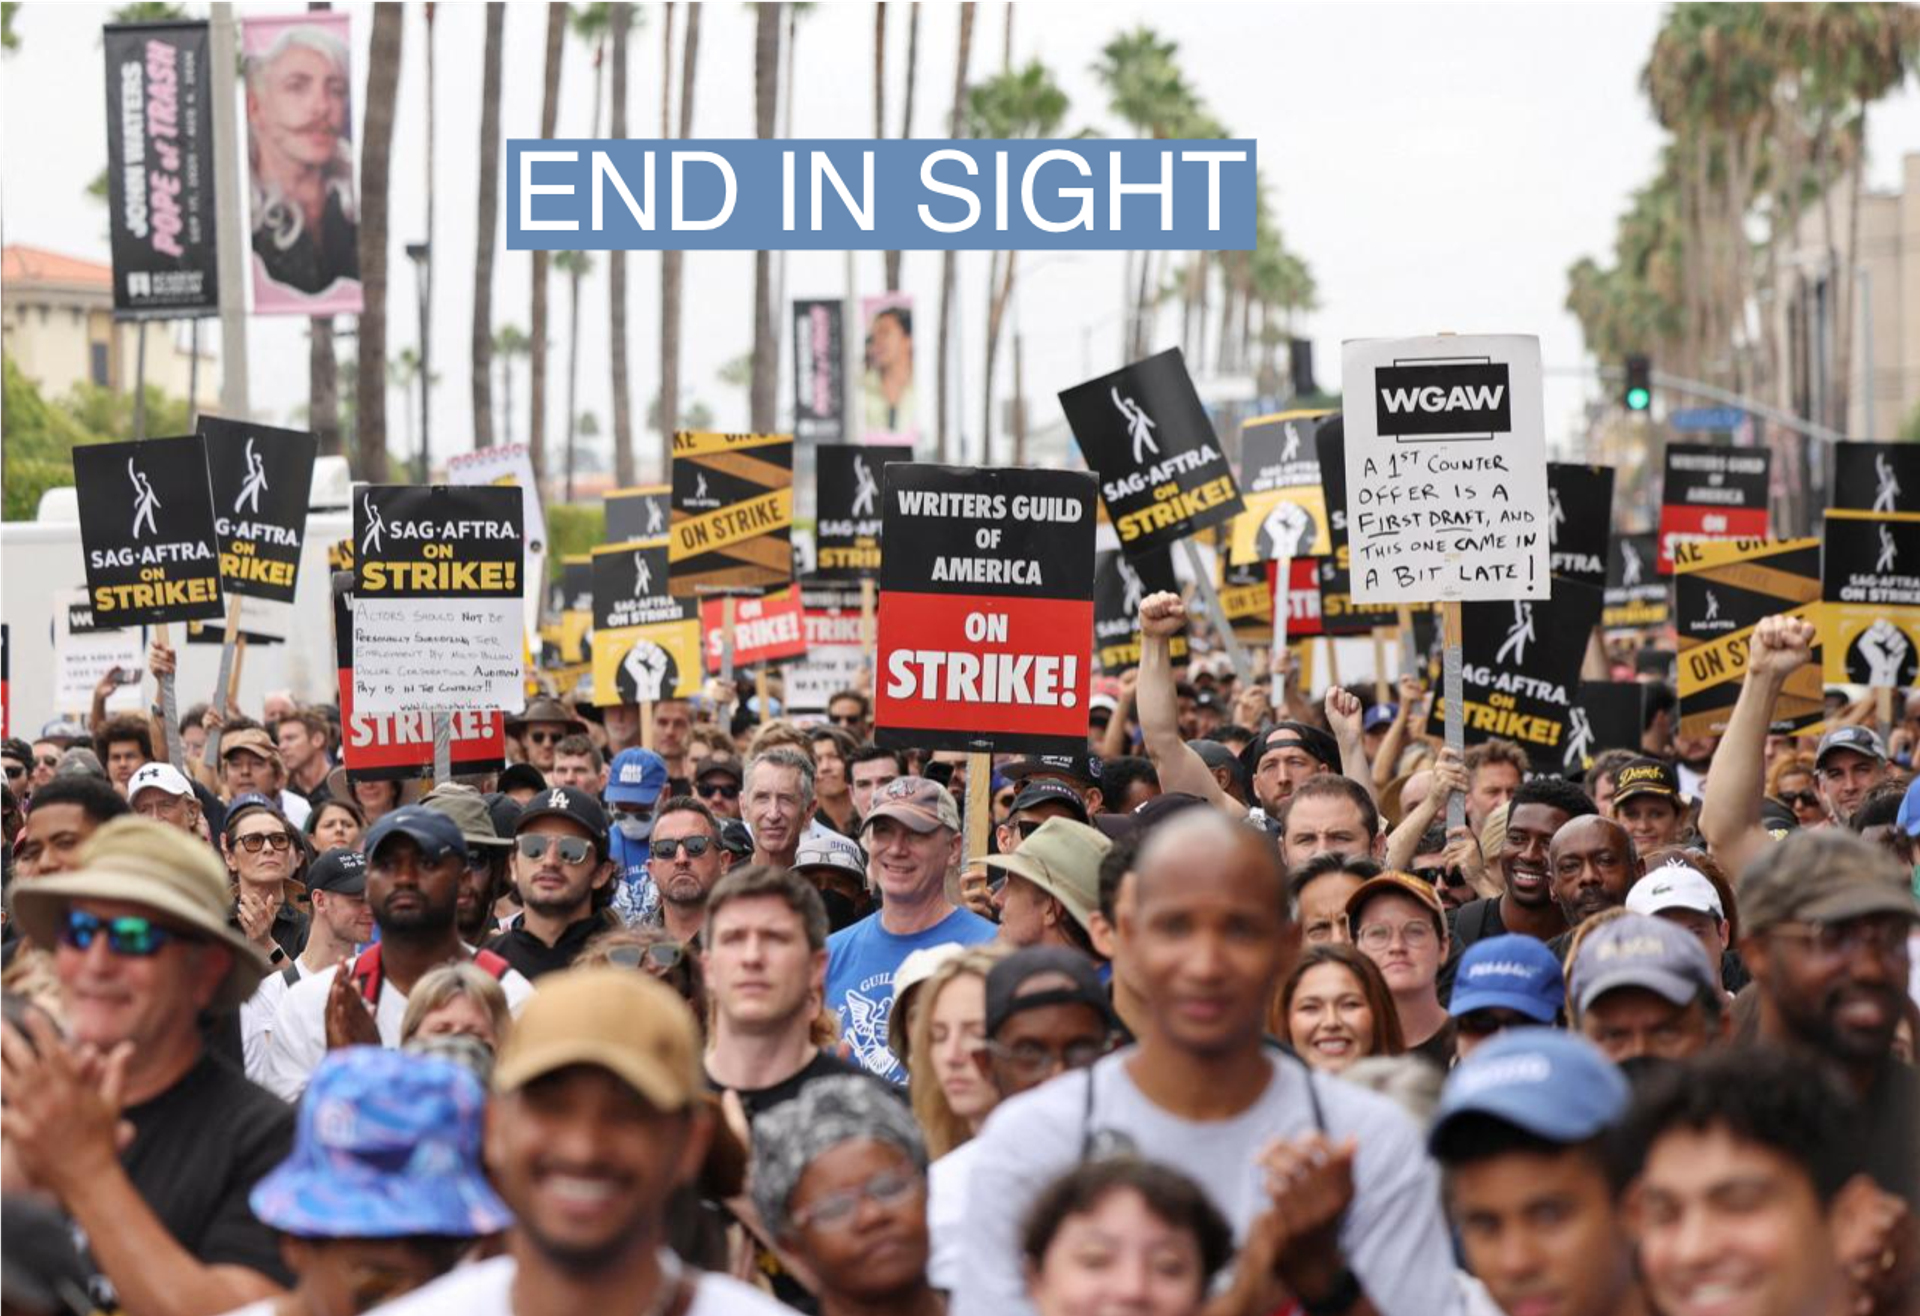  SAG-AFTRA actors and Writers Guild of America (WGA) writers rally during their ongoing strike, in Los Angeles, California, U.S. September 13, 2023. REUTERS/Mario Anzuoni/File Photo